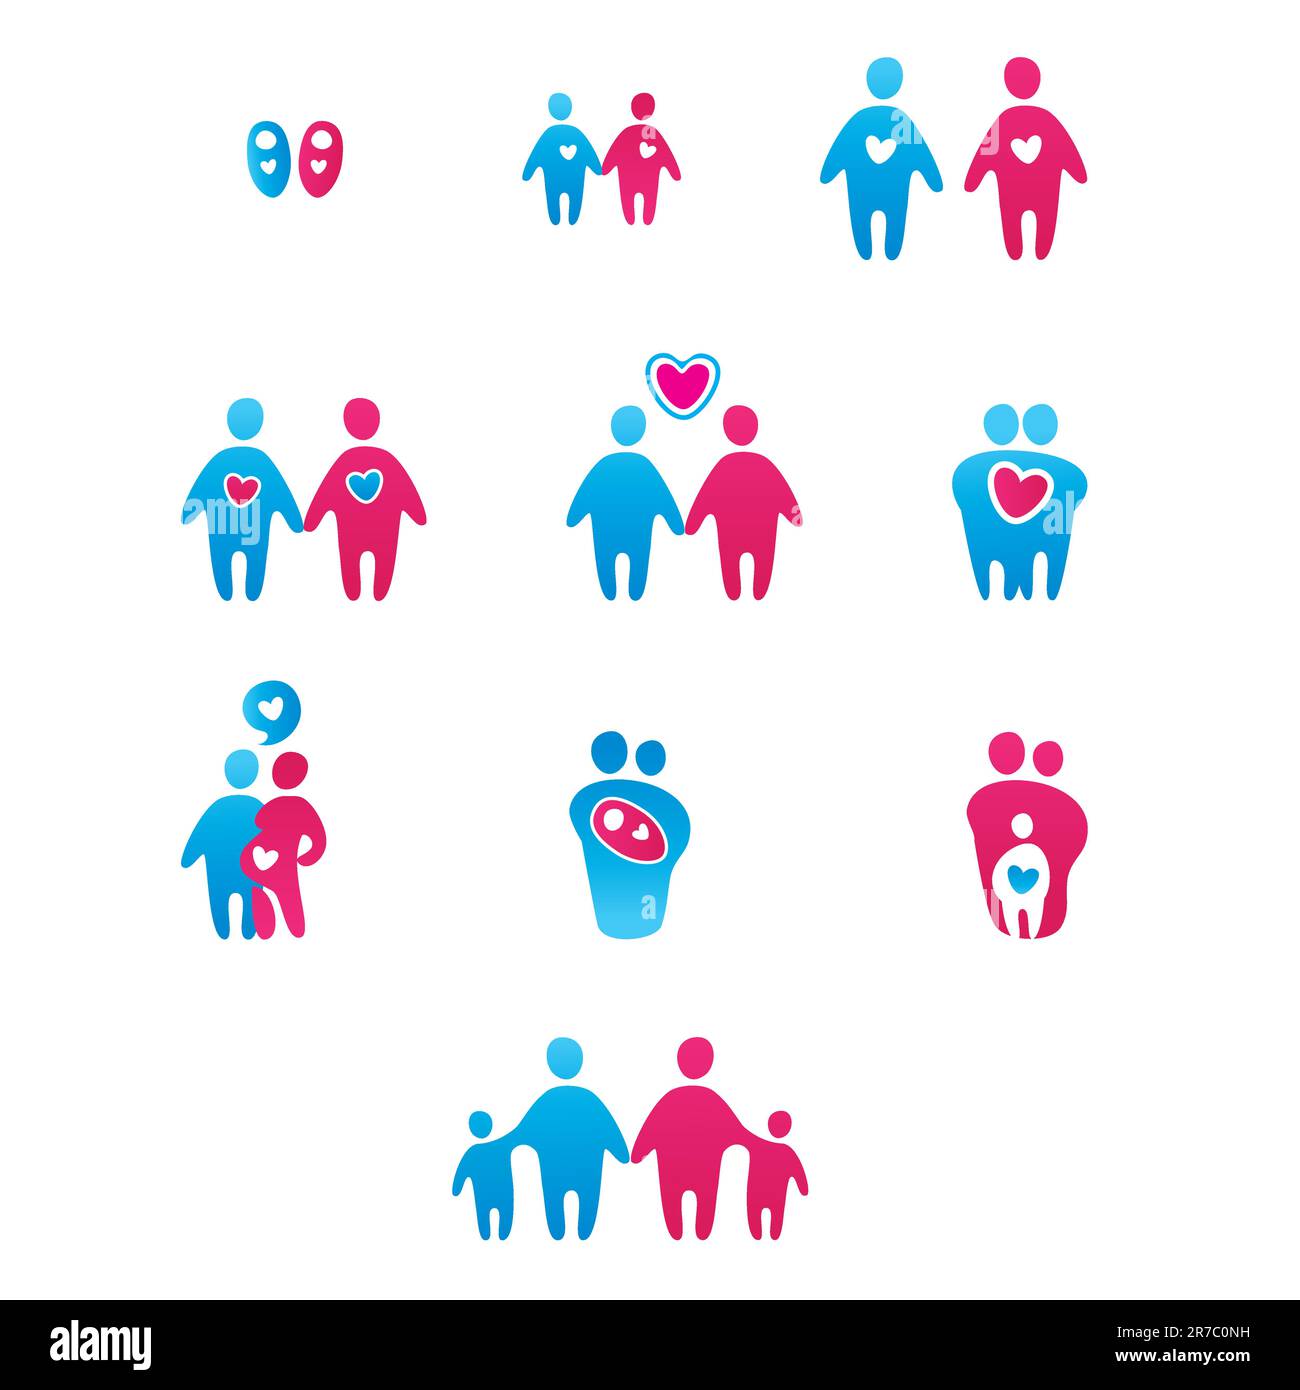 Collection of abstract icons - the boy-girl, man-woman, the development of relationships, family. Stock Vector